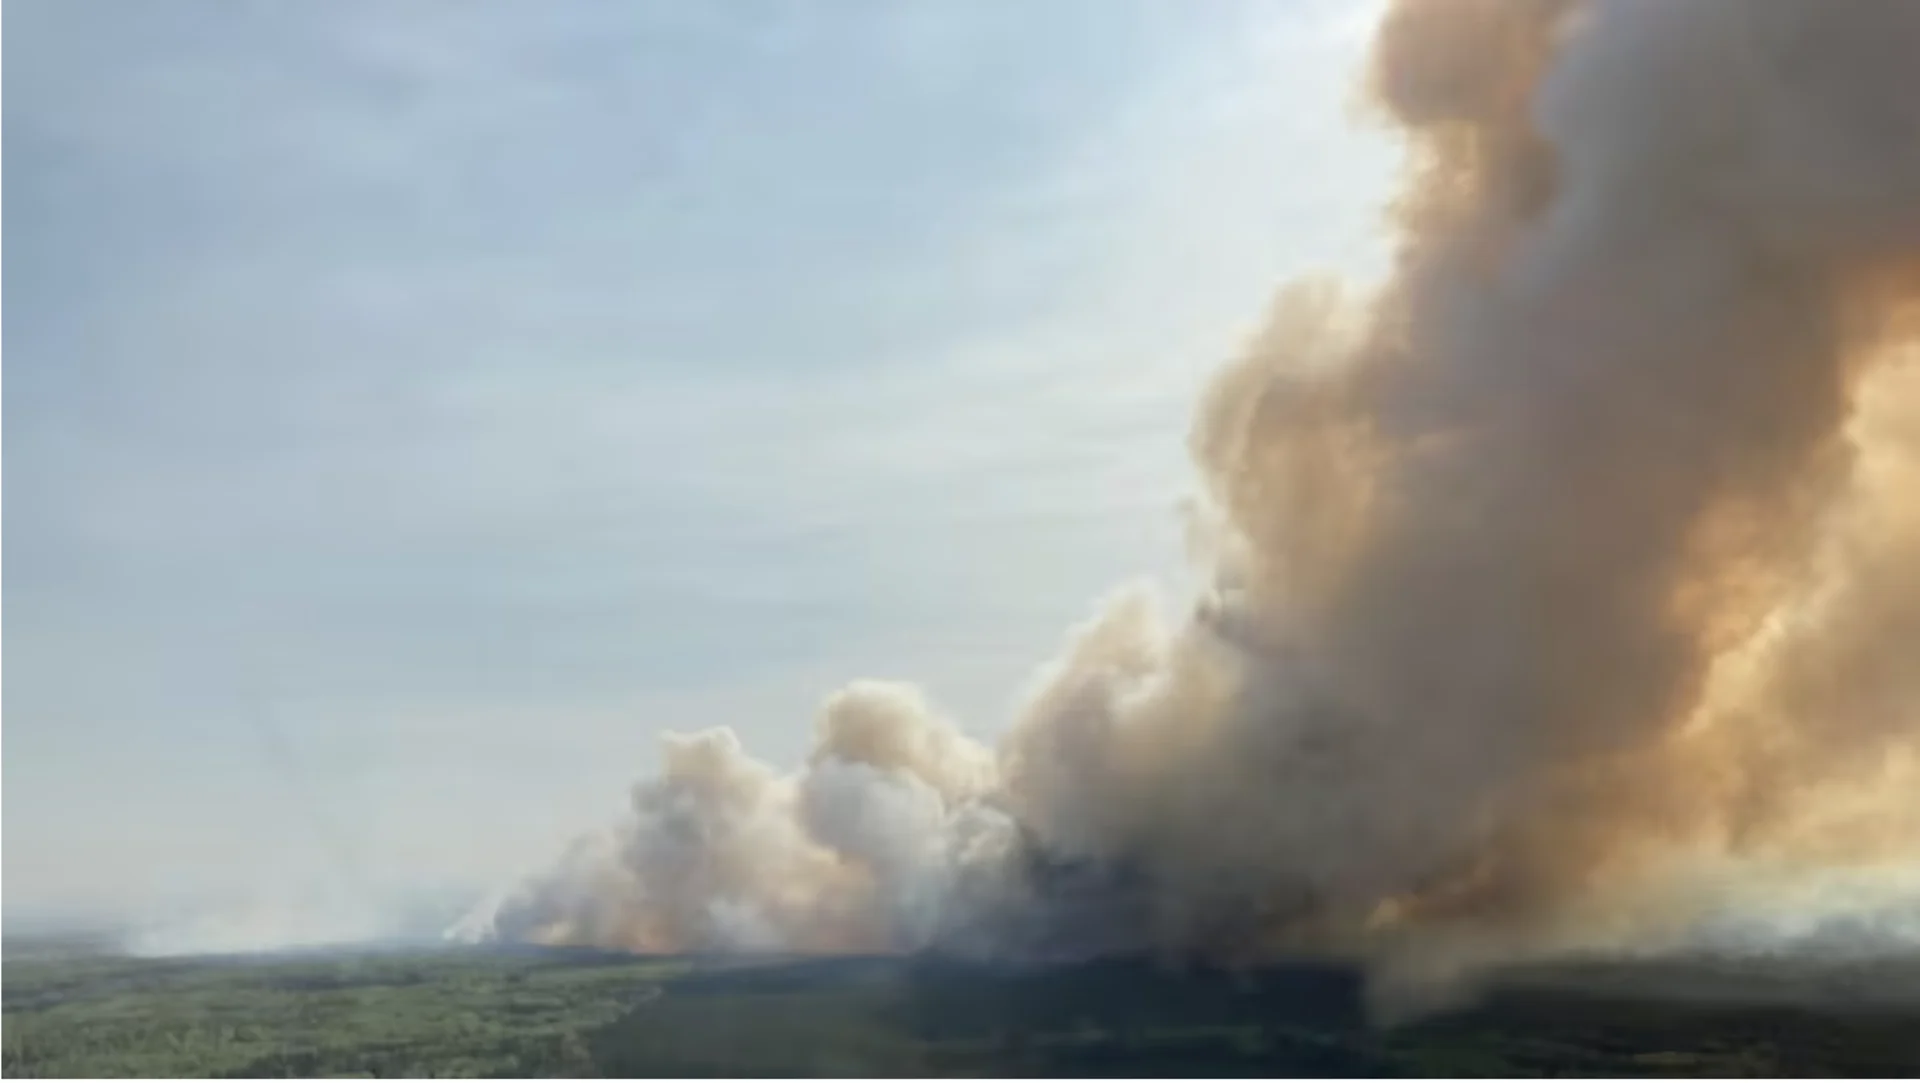 BC Wildfire Service: The Boundary Lake wildfire remains burning out of control on the B.C.-Alta. border, even as crews say they made good progress tackling it overnight. (B.C. Wildfire Service)